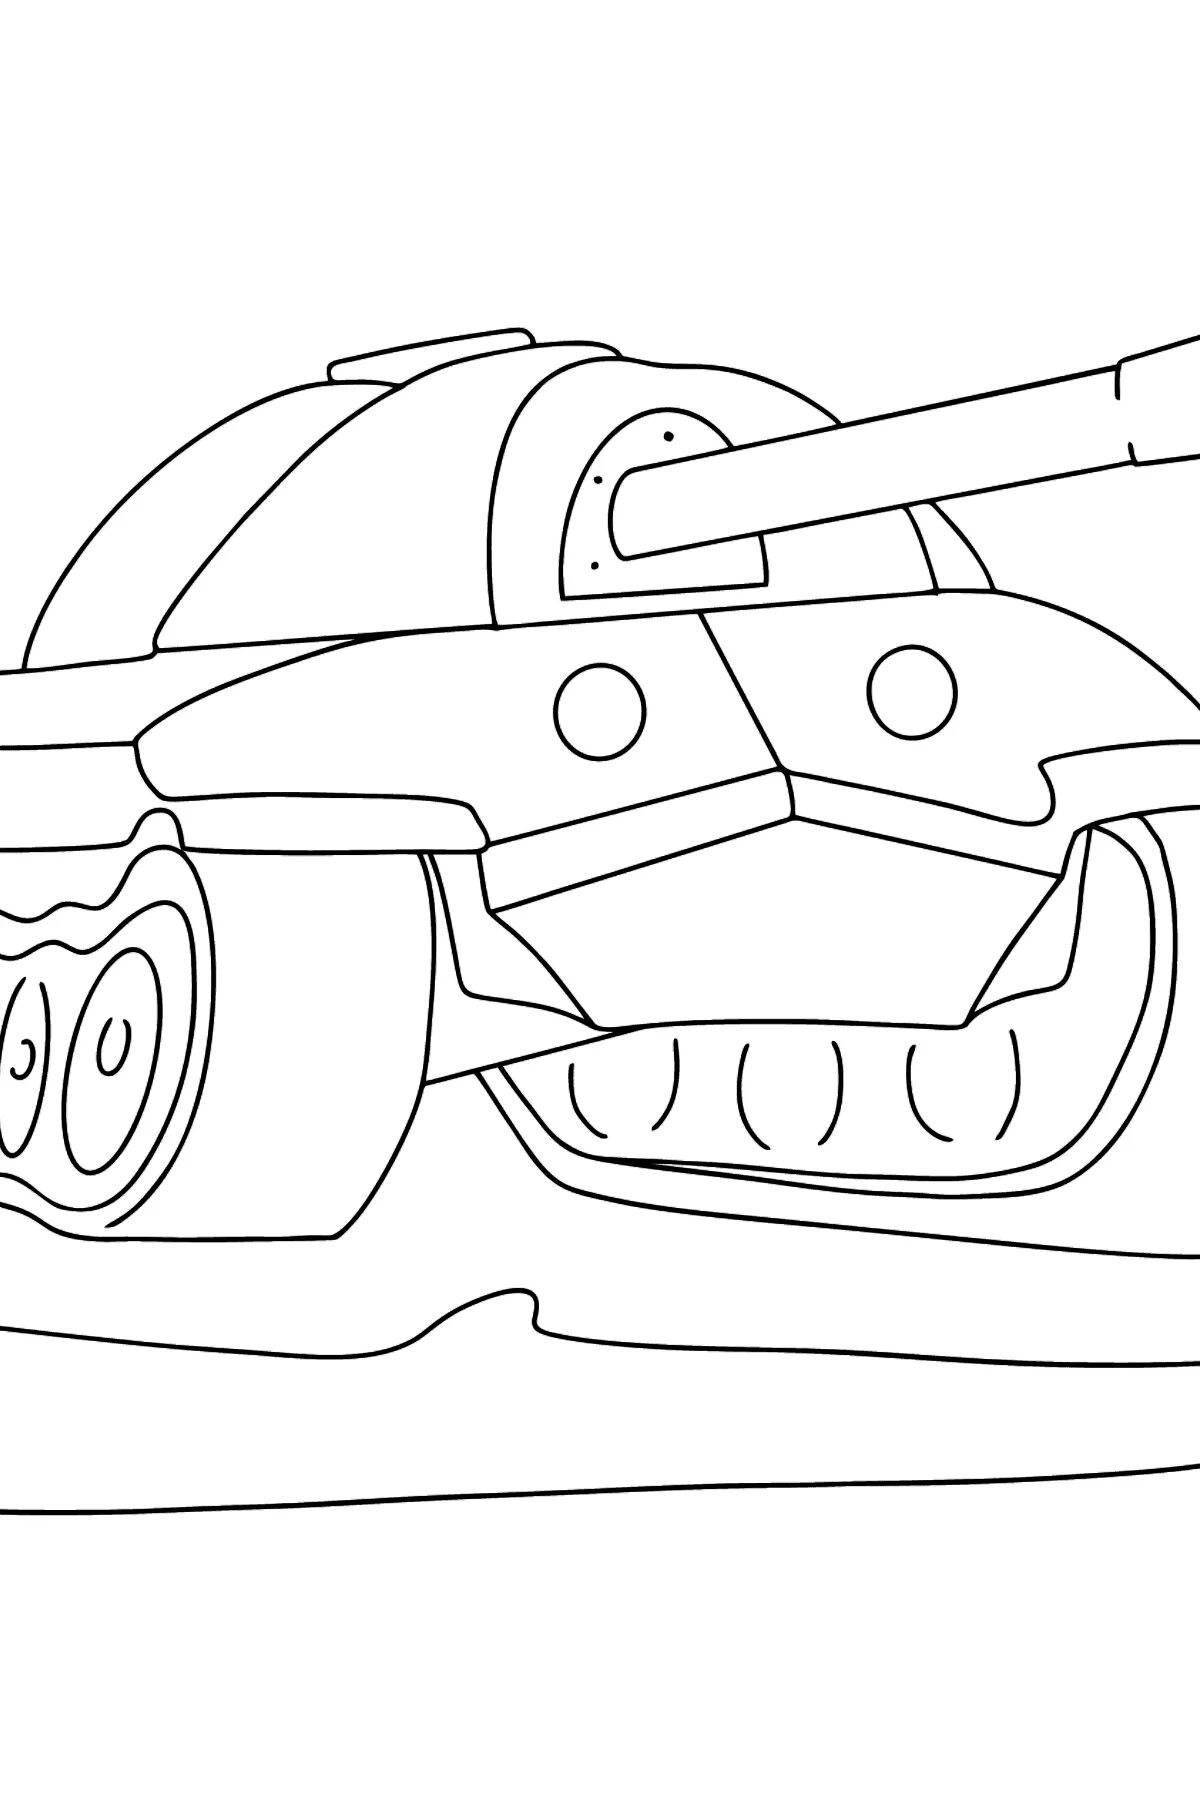 Glowing tank coloring page